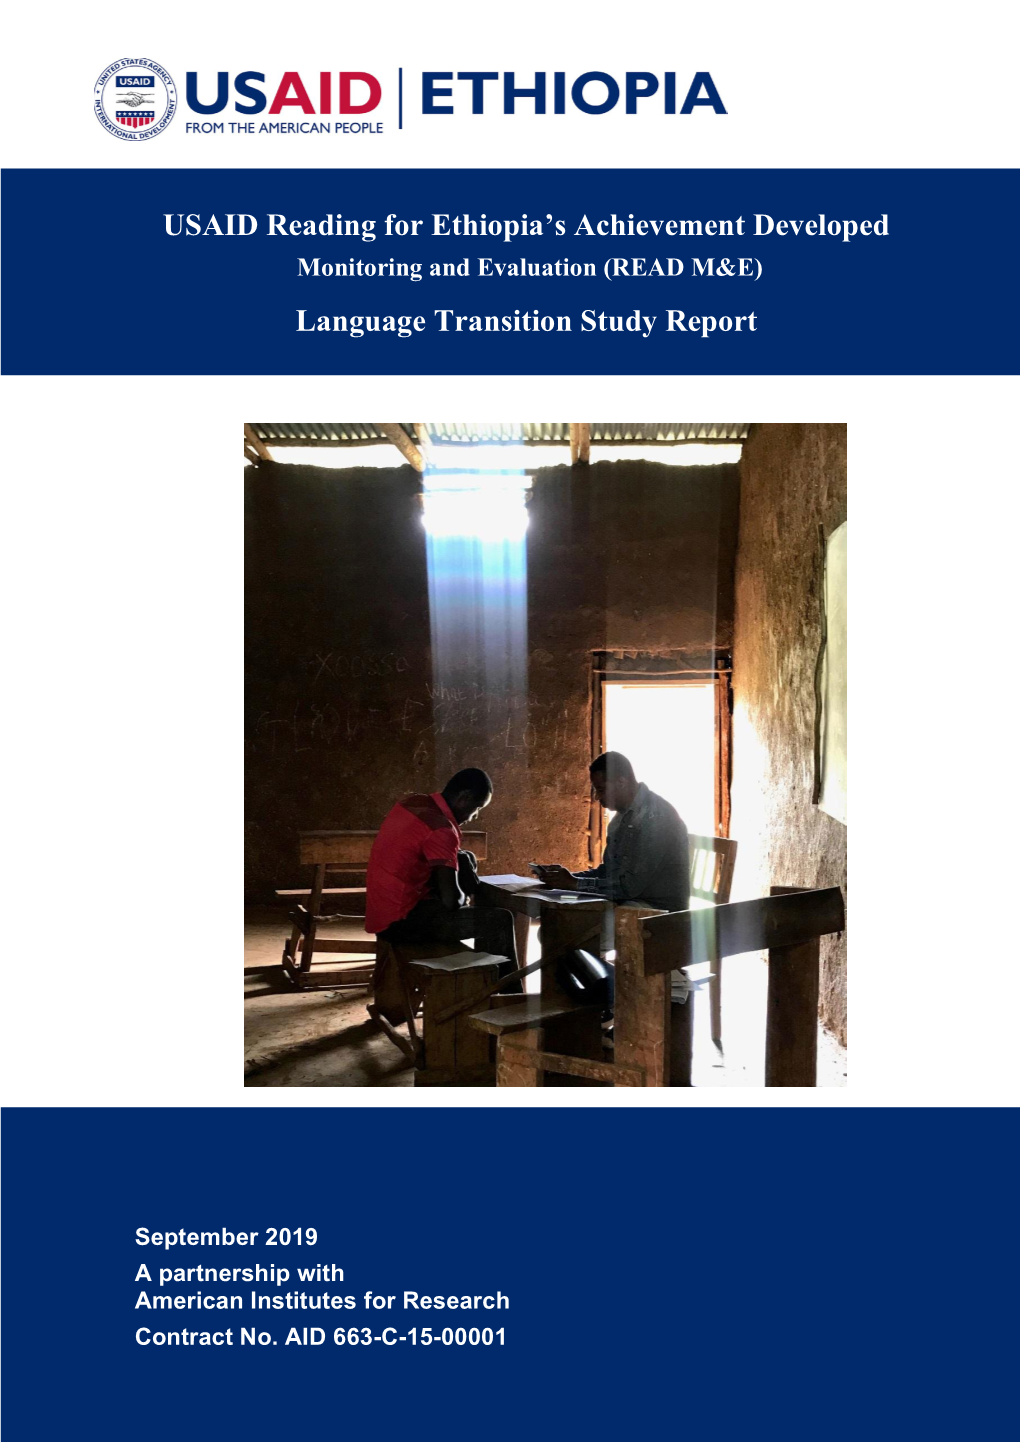 USAID Reading for Ethiopia's Achievement Developed Monitoring